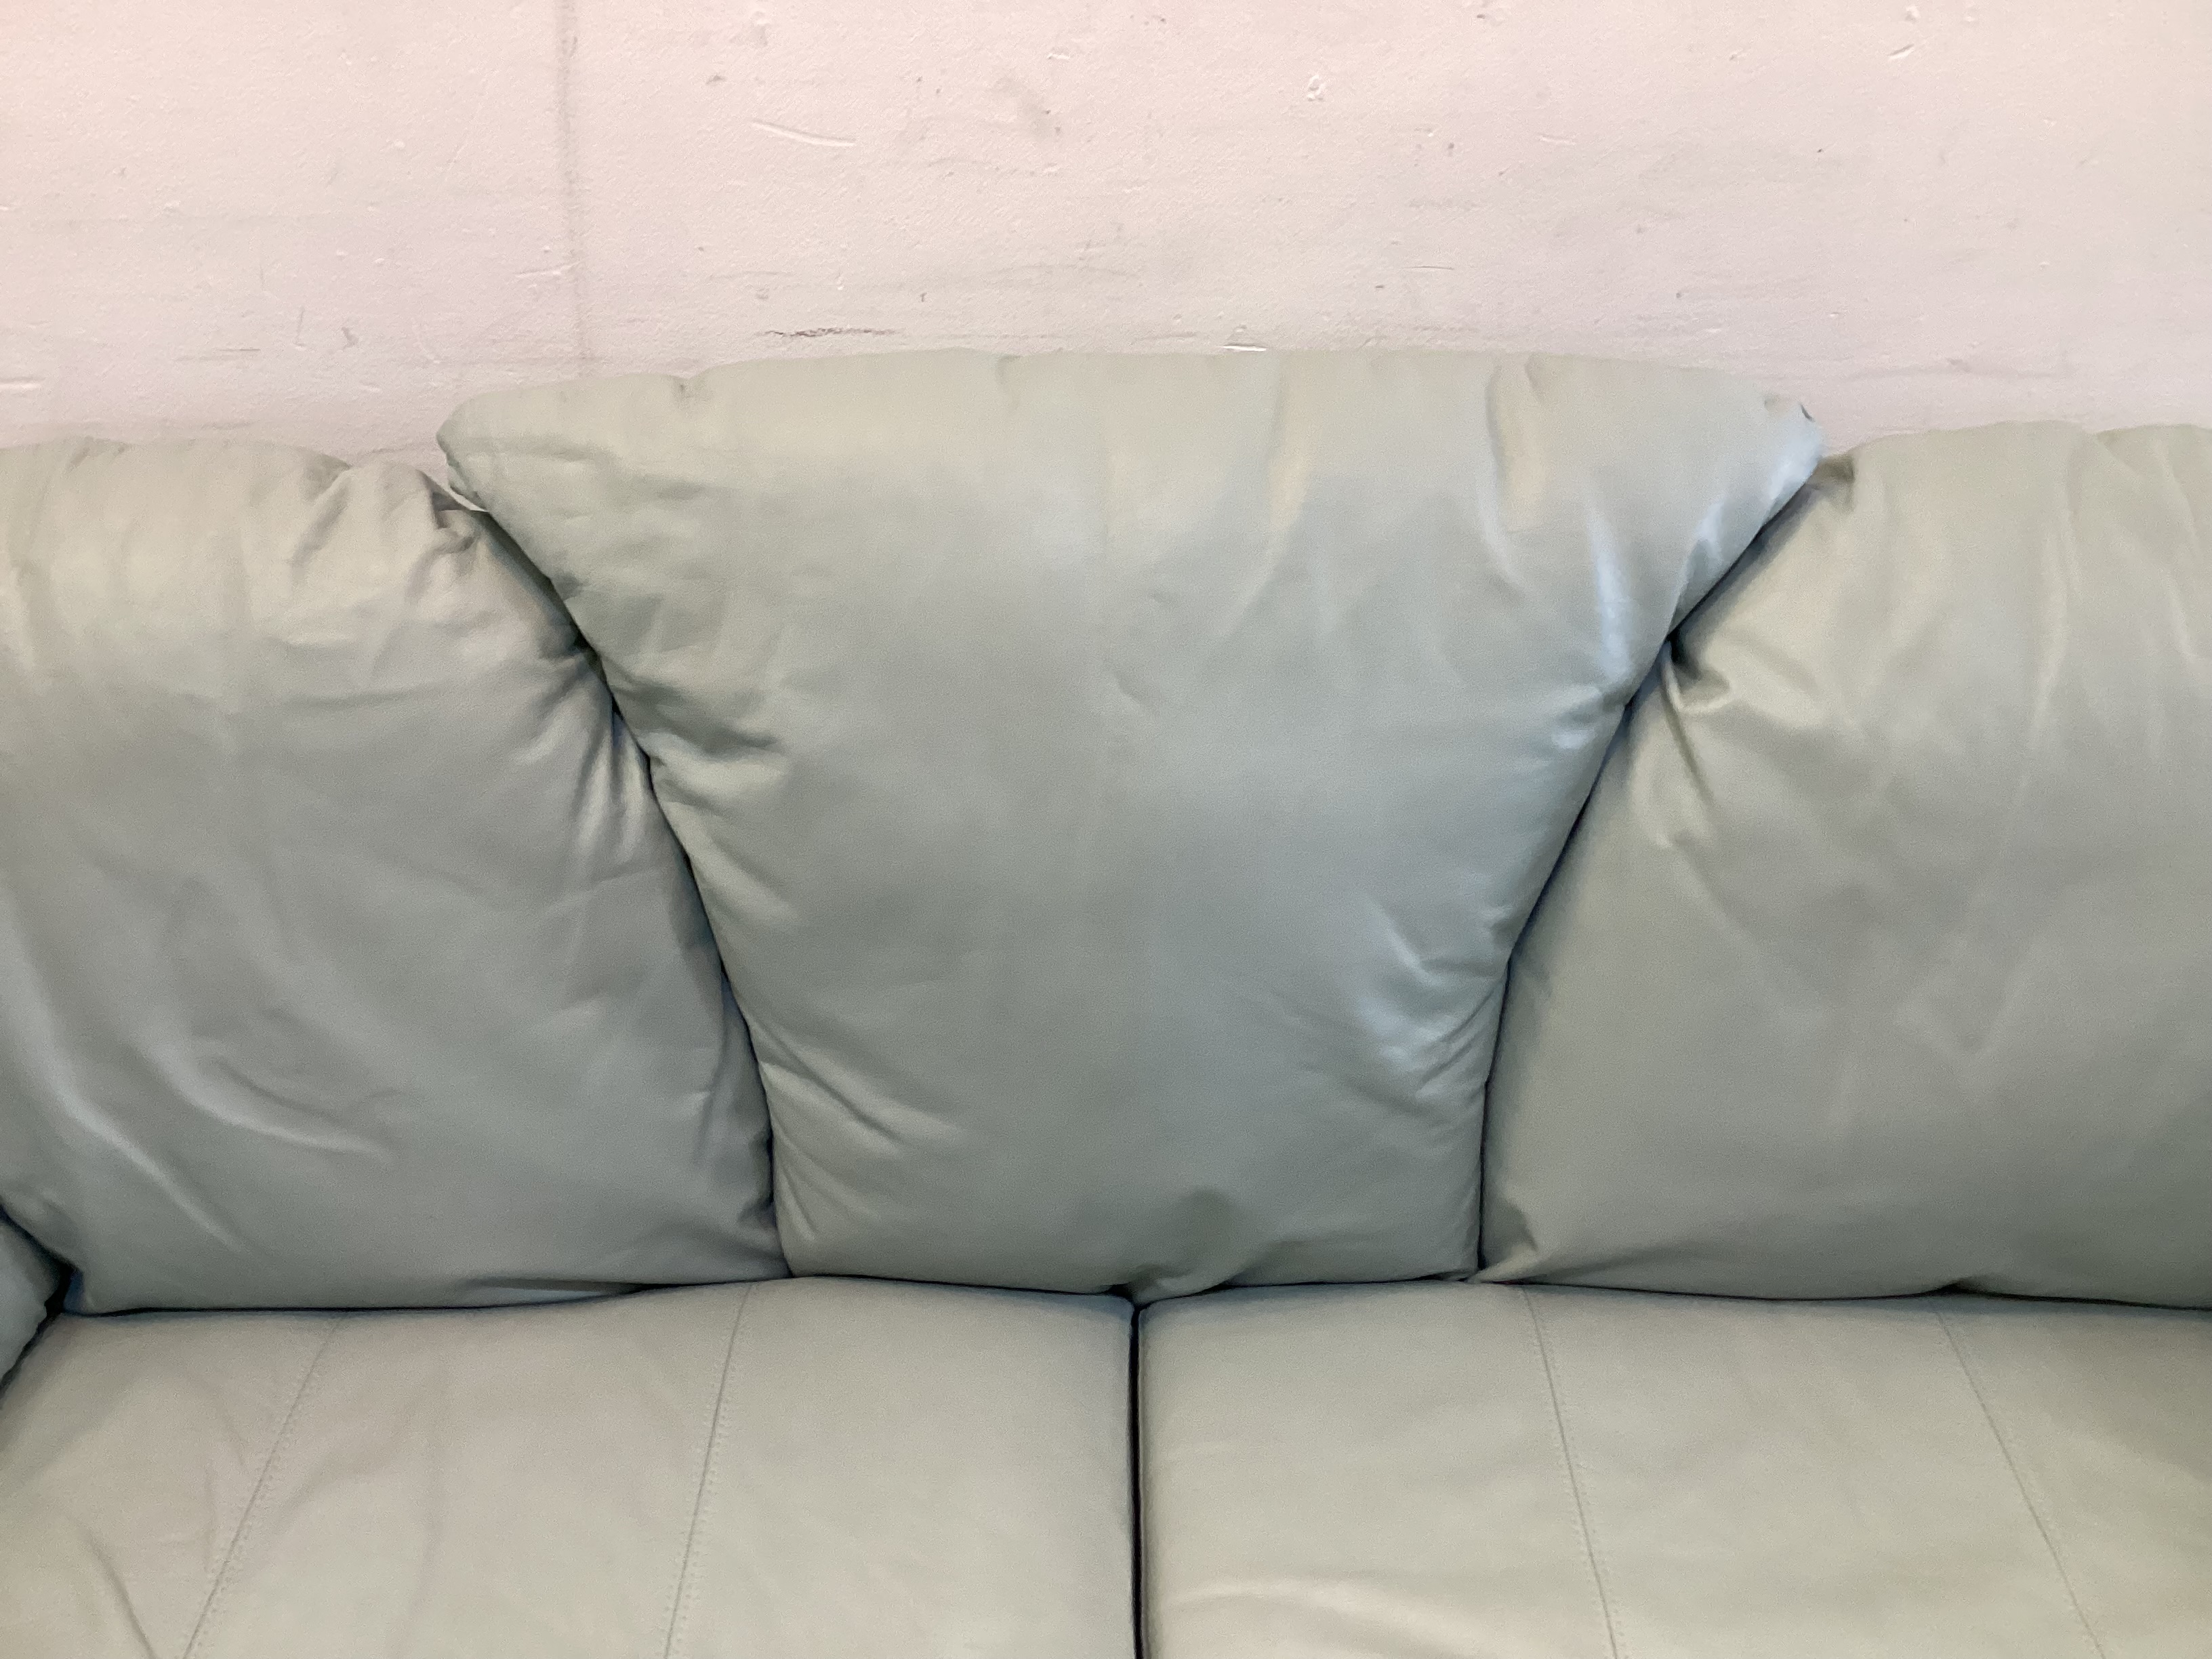 Two Seater Sofa